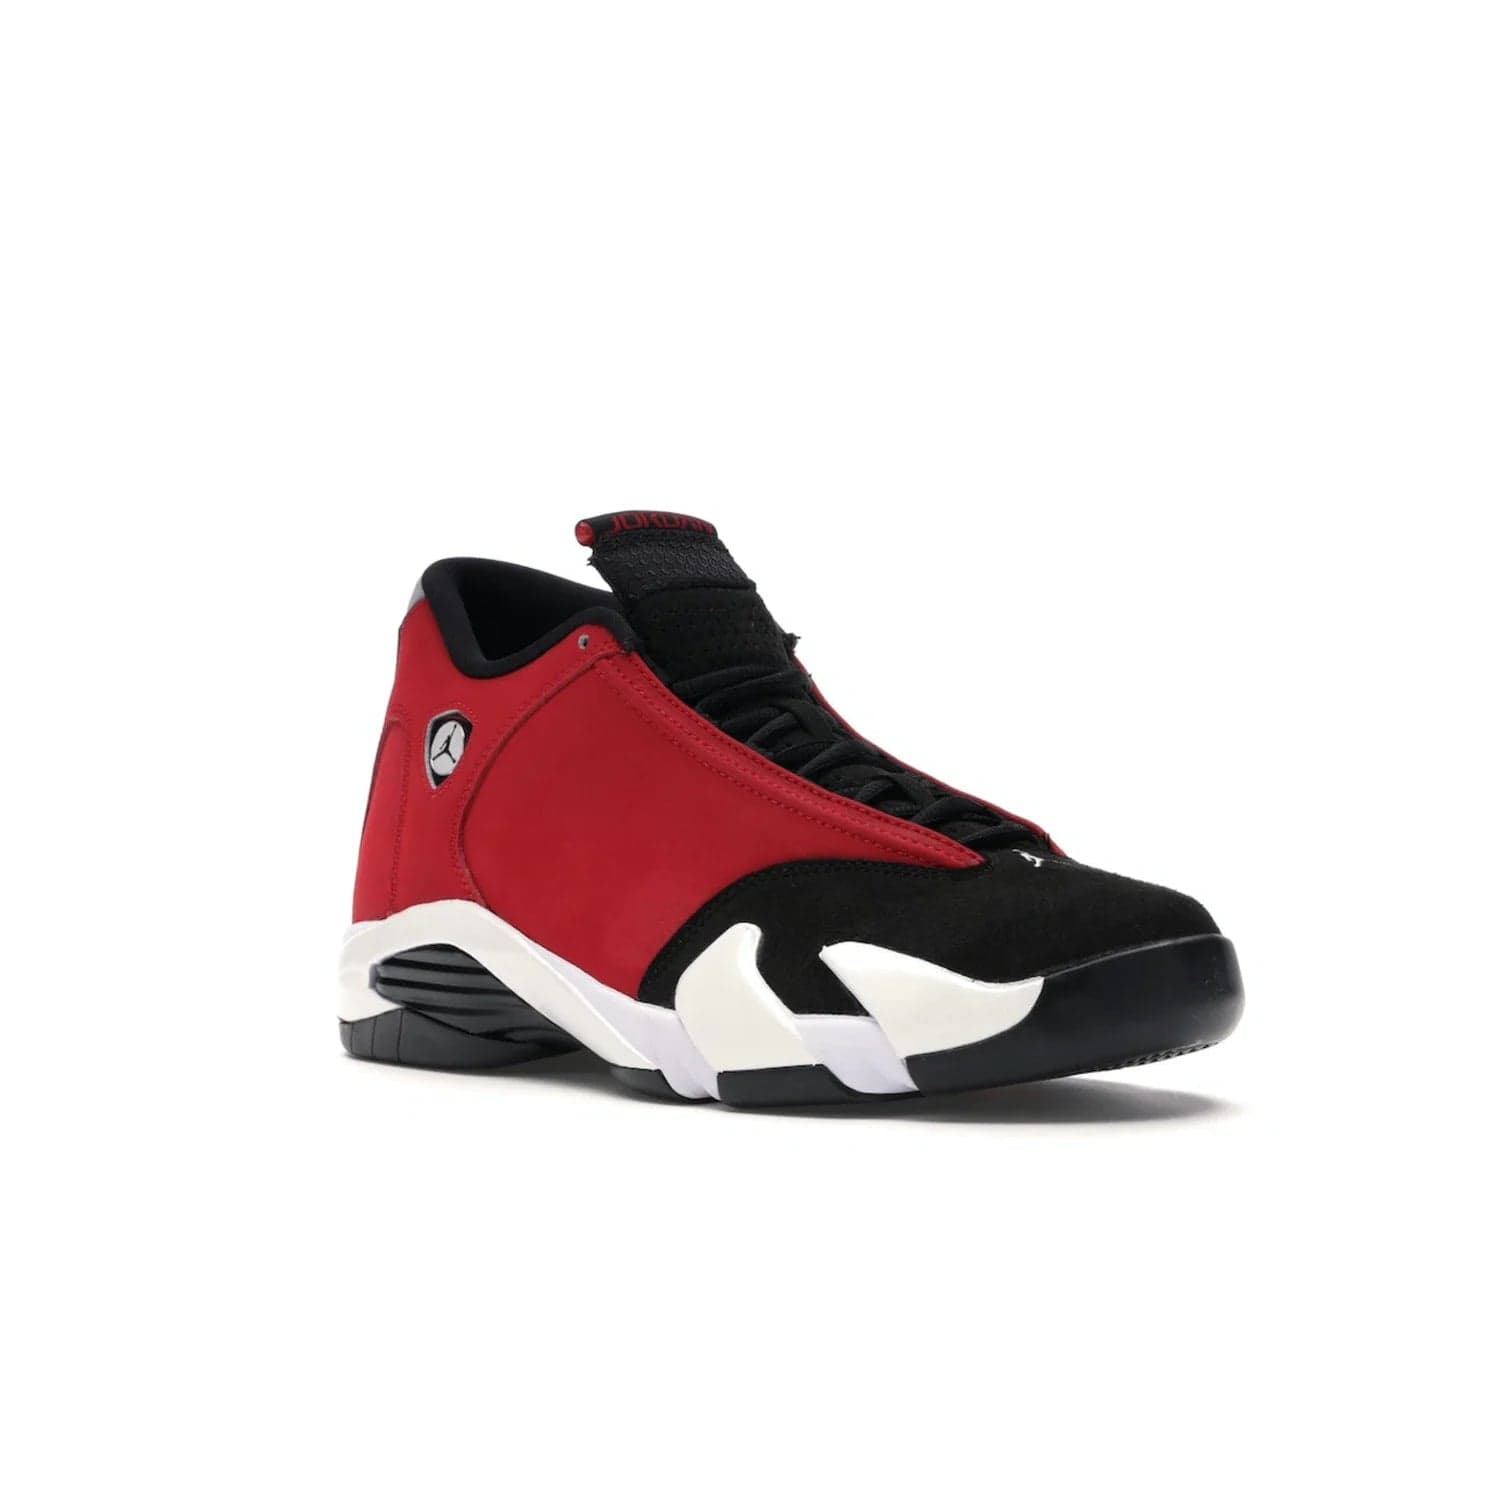 Jordan 14 Retro Gym Red Toro - Image 5 - Only at www.BallersClubKickz.com - Feel the Chicago Bulls energy with the Jordan 14 Retro Gym Red Toro! Black, red, and white design unites performance and fashion. Get your hands on this limited edition Jordan and show off your style today.